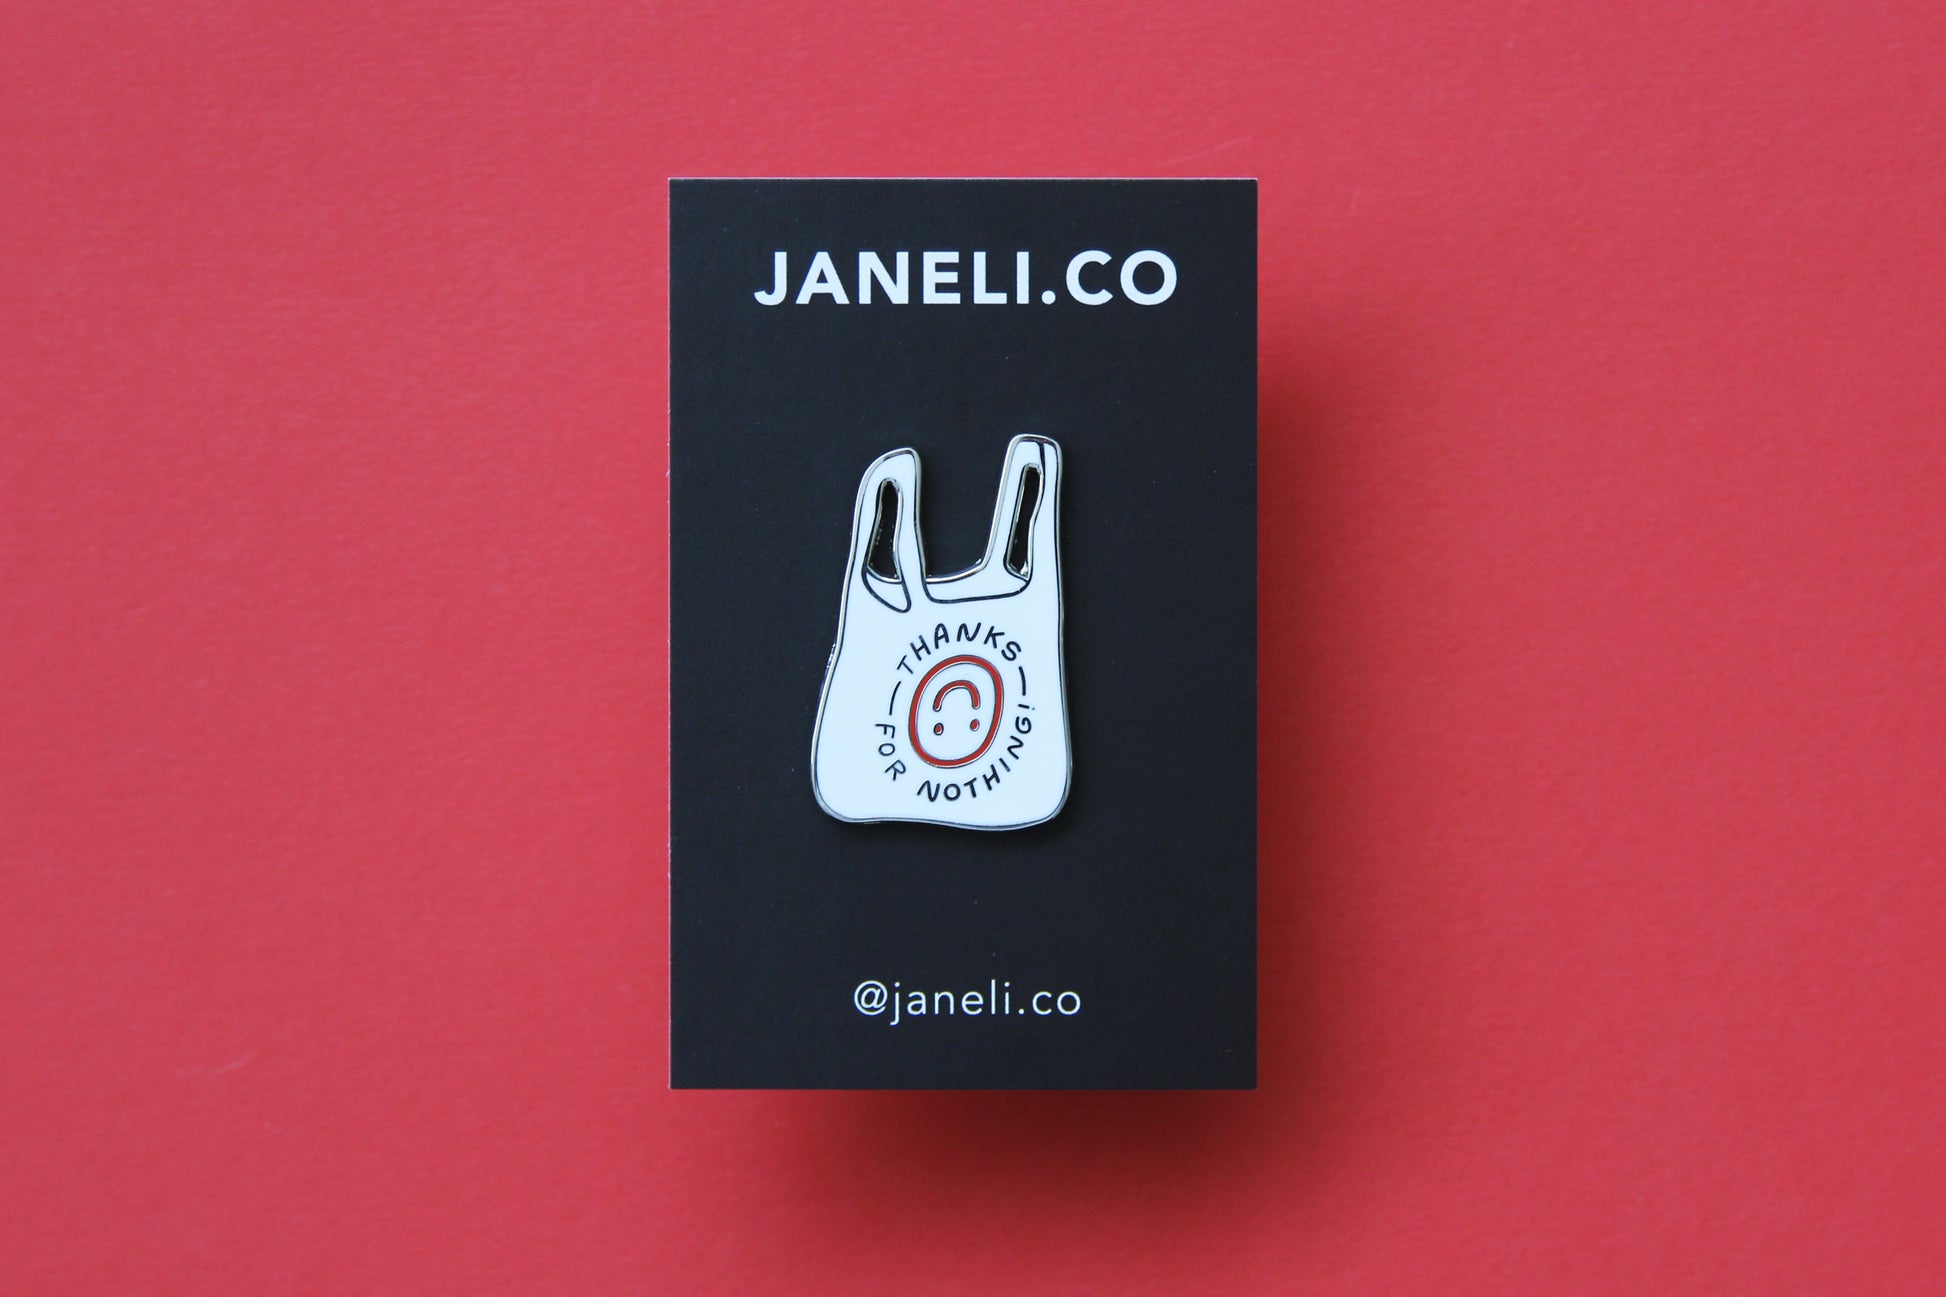 An enamel pin showing a plastic takeout bag that says "Thanks for nothing" with an upside down smiley face on a black JaneLi.Co backing card over a red background.